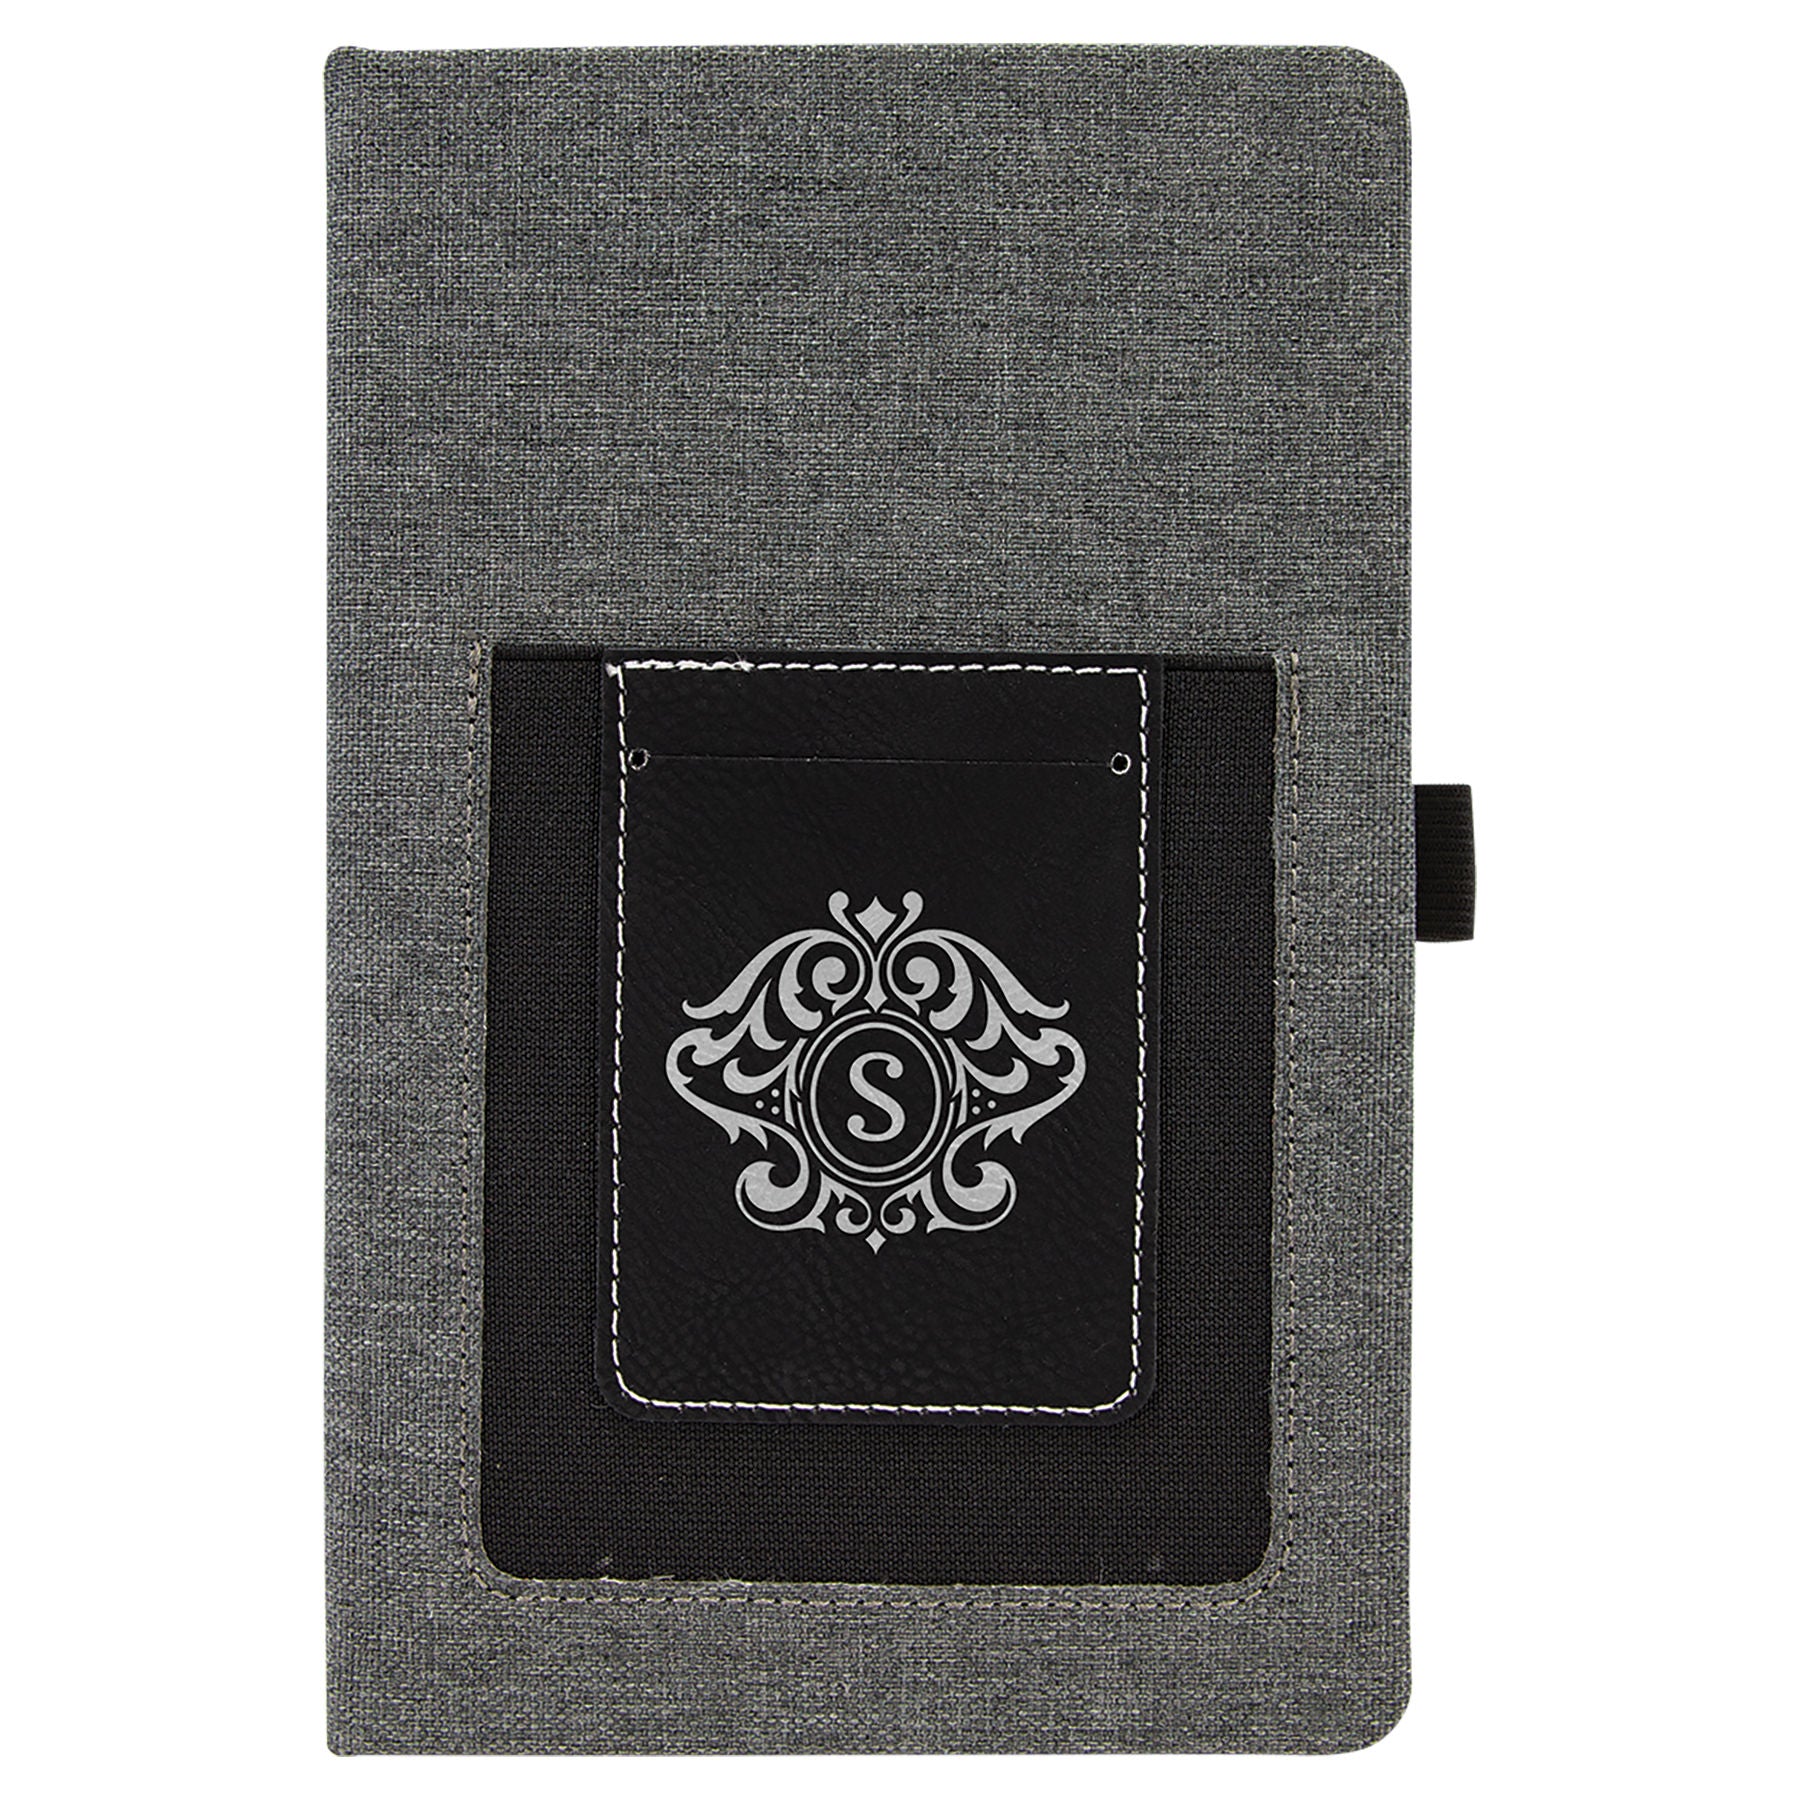 5 1/4" x 8 1/4" Laserable Leatherette Journal with Cell/Card Slot